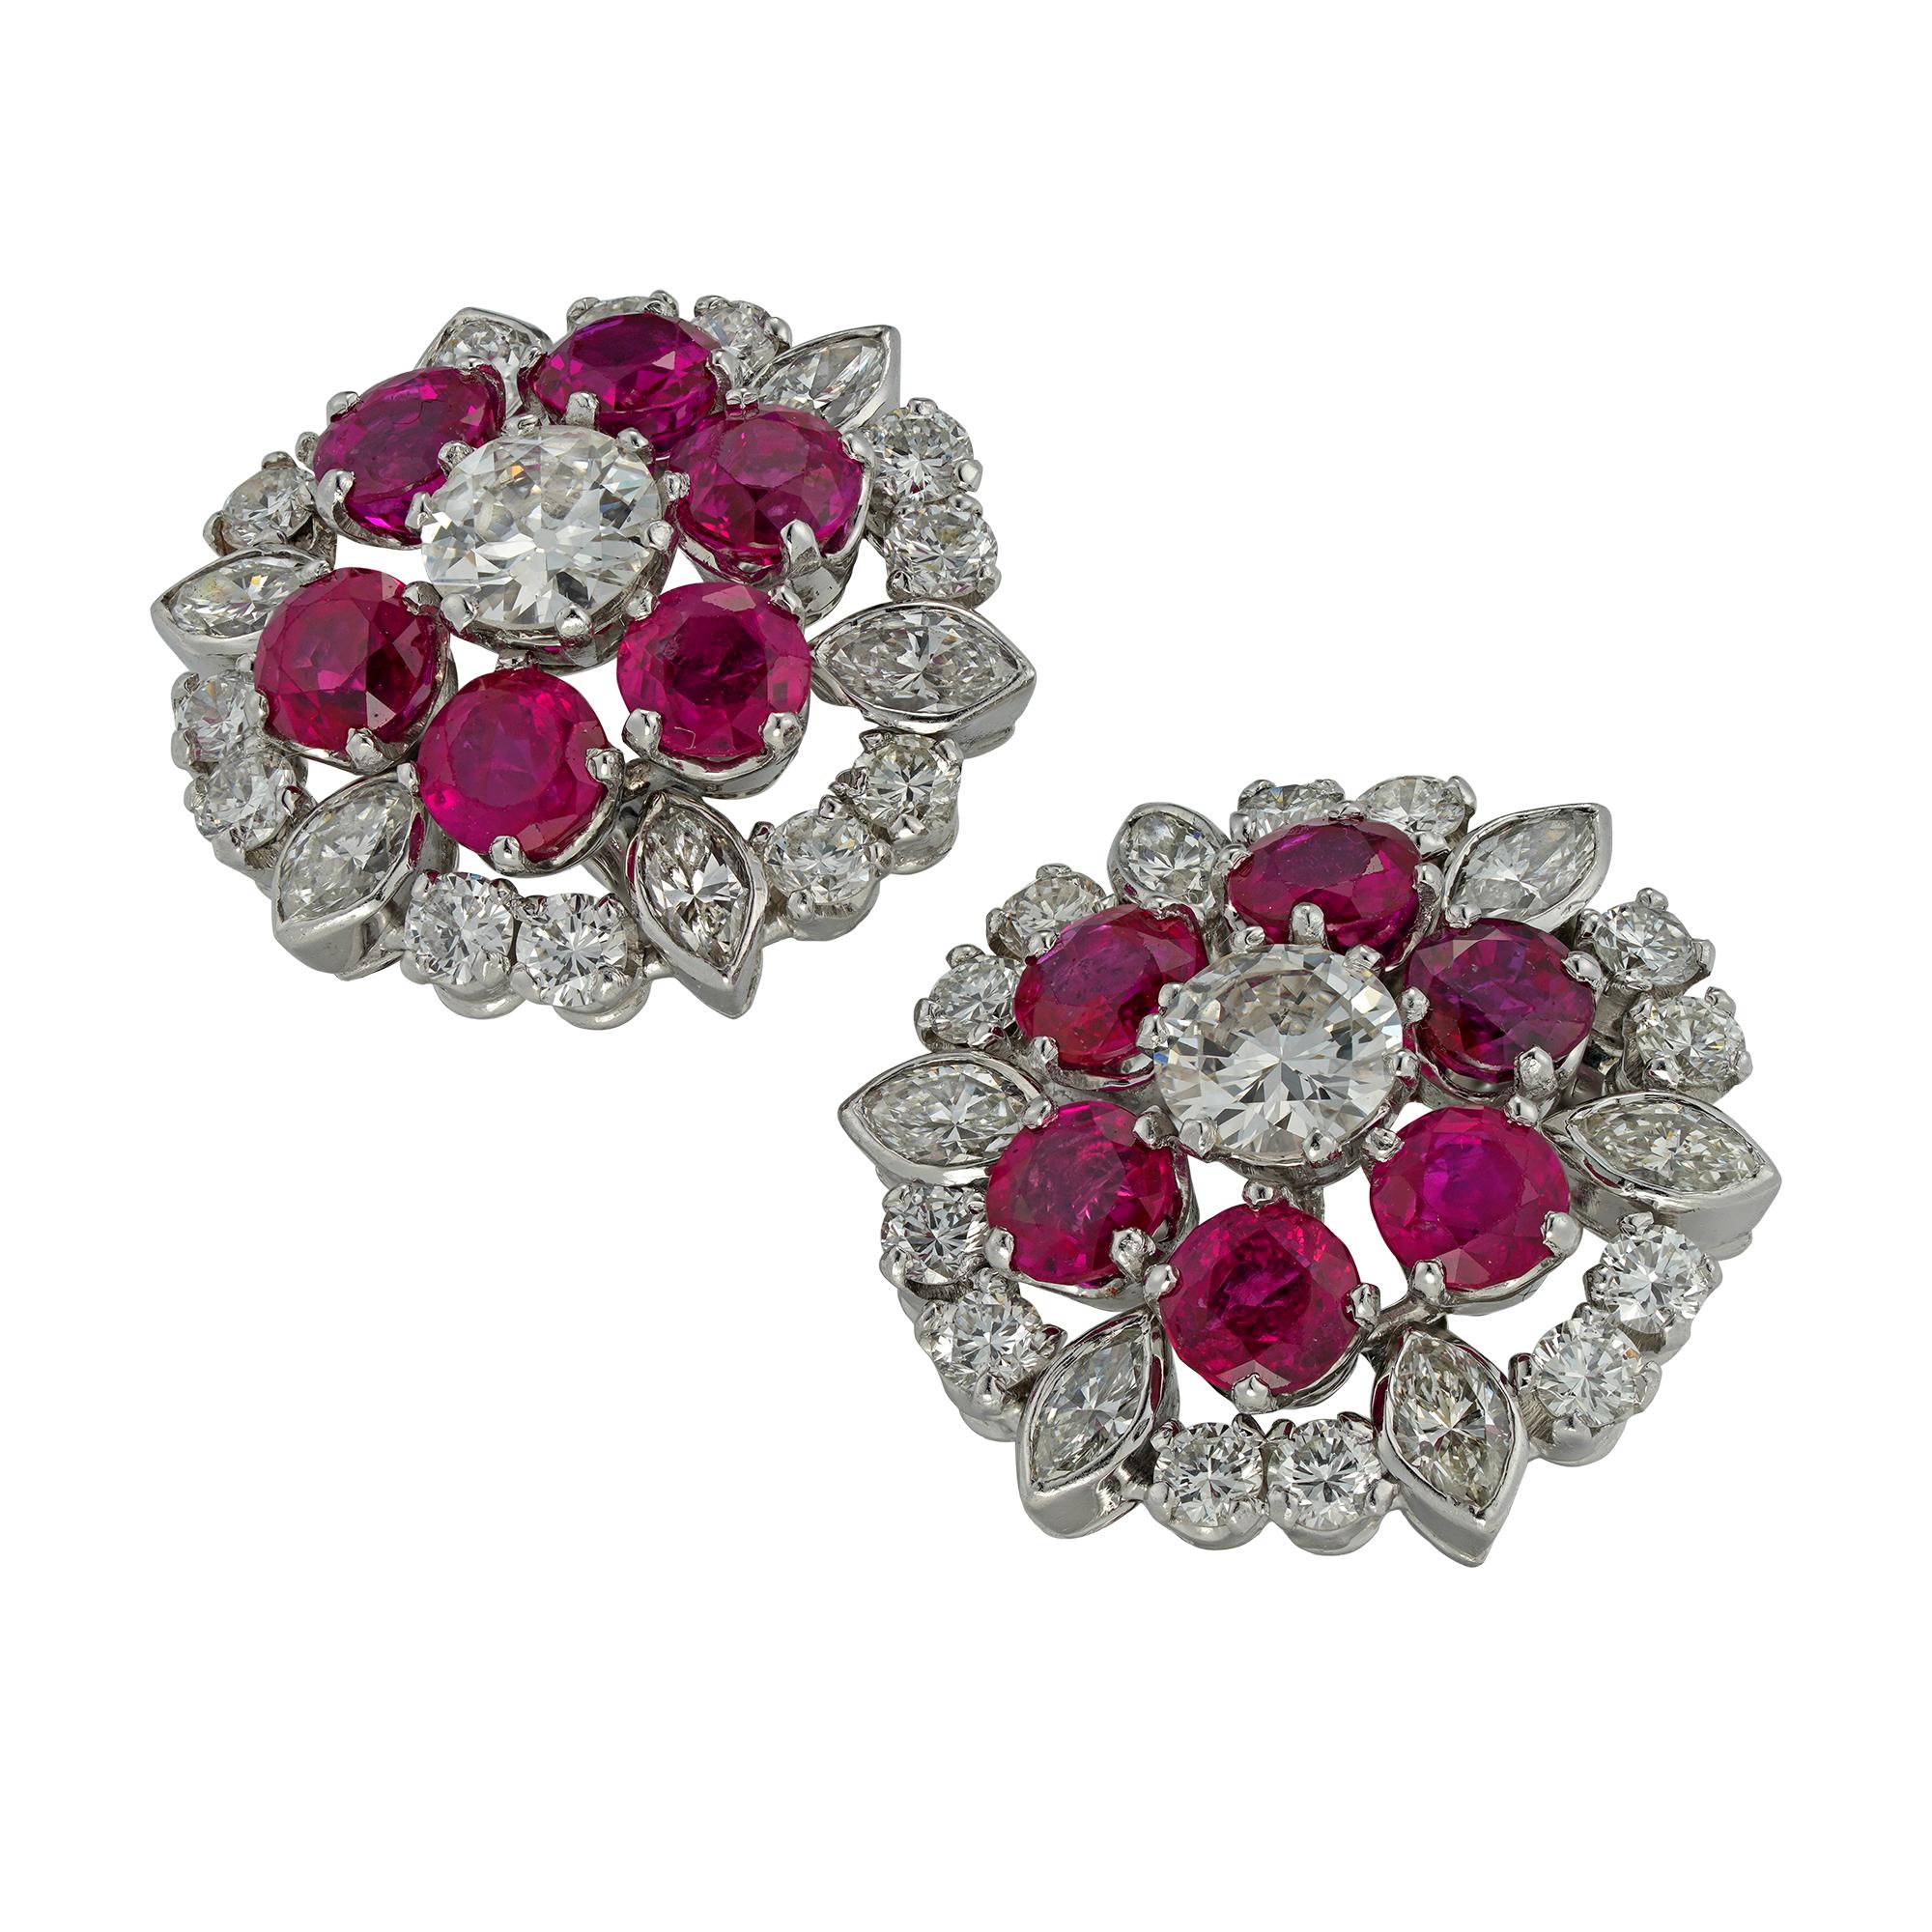 A pair of vintage ruby and diamond cluster earrings, each earing centrally-set with an old European-cut diamond estimated to weigh 0.55 carats, surrounded by six round faceted rubies, each estimated to weigh 0.3 carats, accompanied by GCS Report